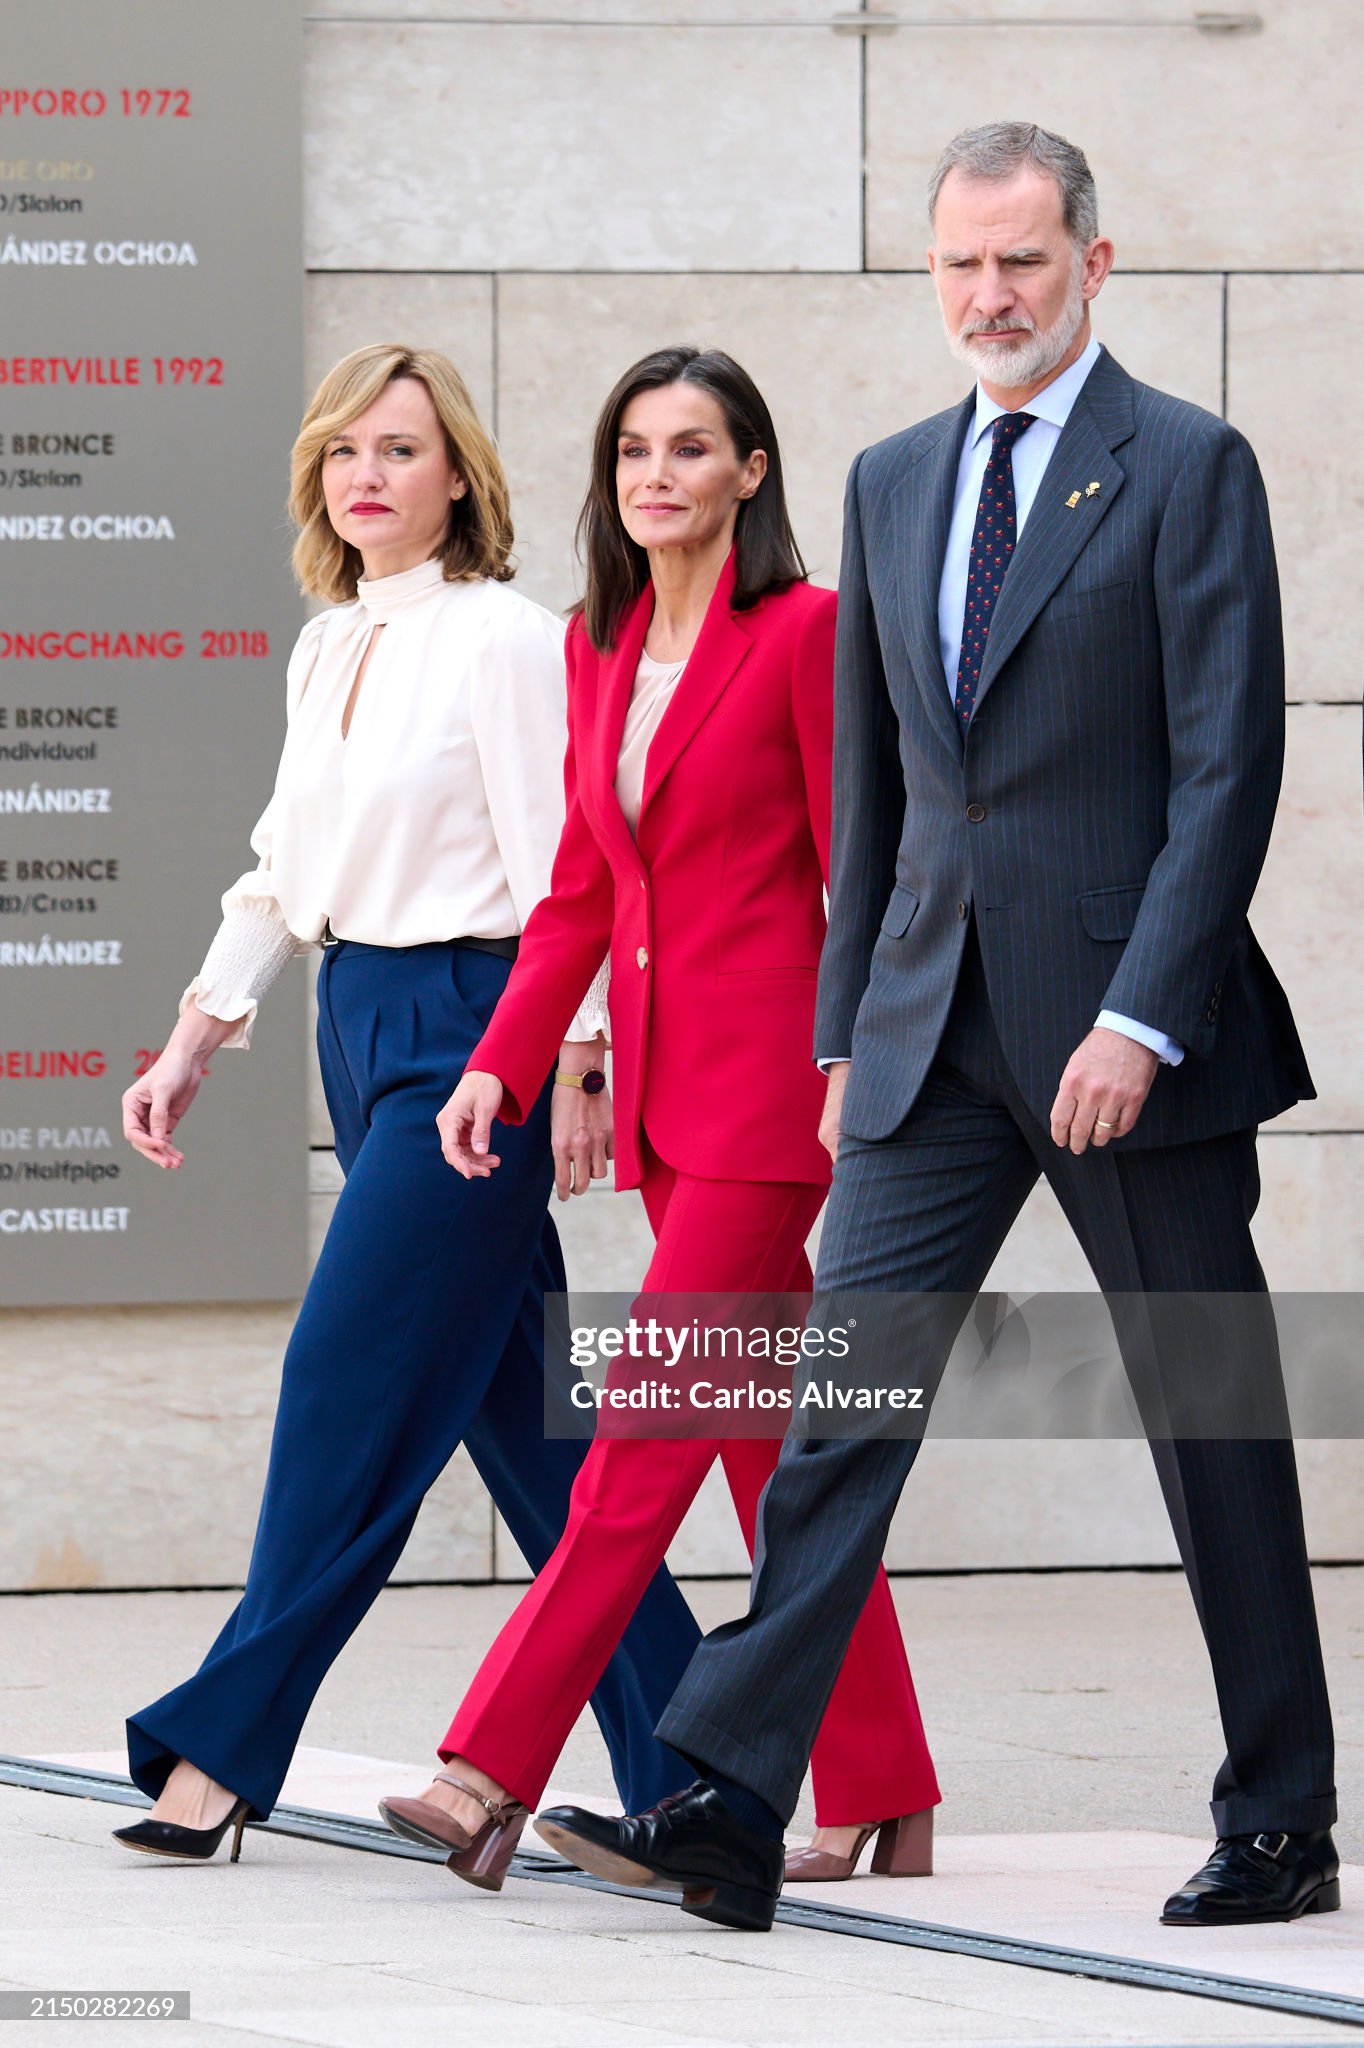 spanish-royals-attend-a-commemorative-act-for-the-spanish-participation-in-the-olympic-games.jpg?s=2048x2048&w=gi&k=20&c=JQ8PSuVeq4jW1ujshXpT-YBXc_vyQw83FWykRuQhxSo=